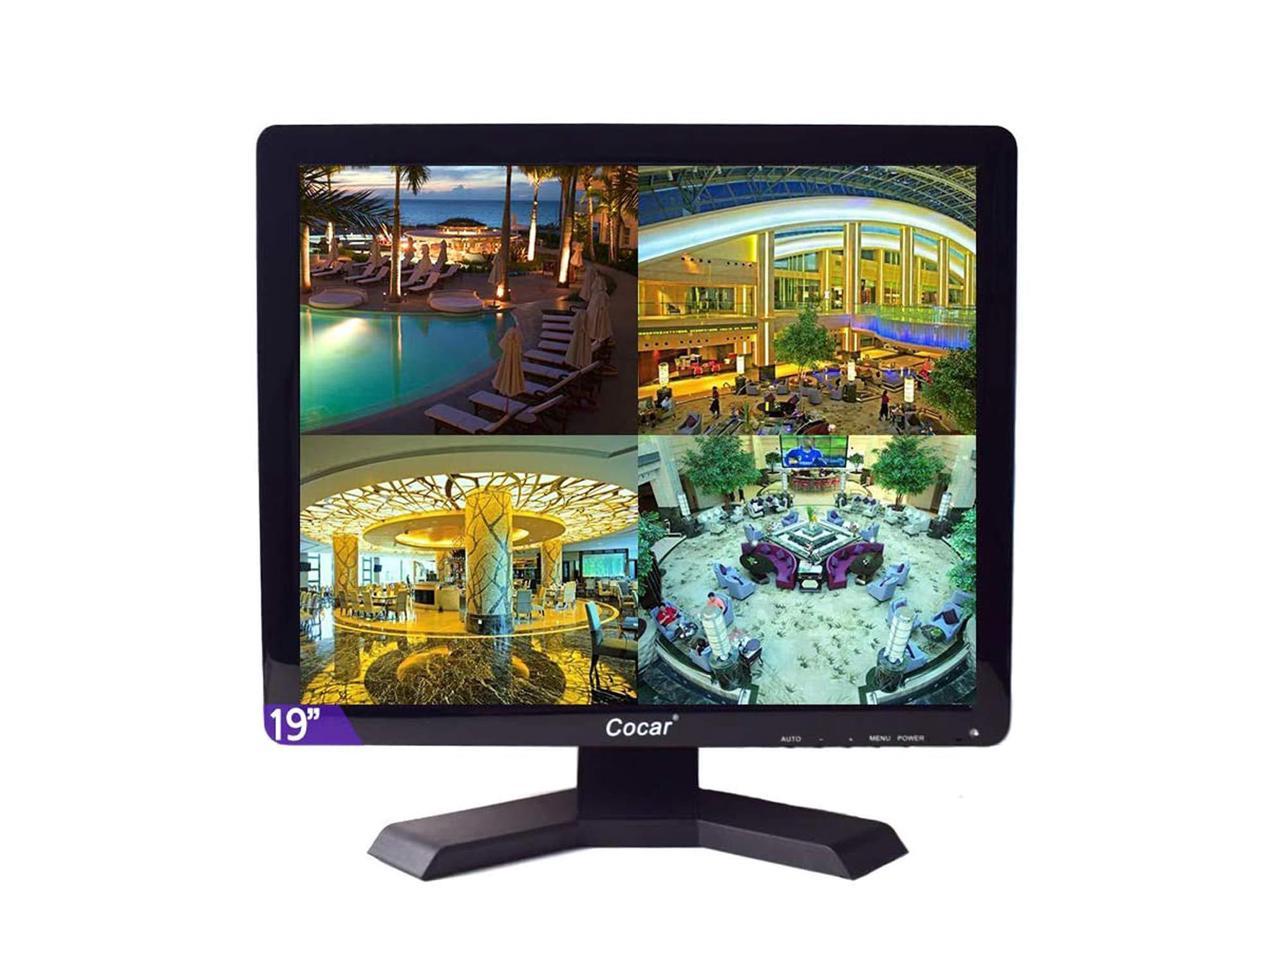 19 inch CCTV Security Monitor with BNC VGA HDMI AV Built-in Speaker 4:3 HD Display LCD Screen Display with USB Media Player for Home Surveillance Camera STB PC